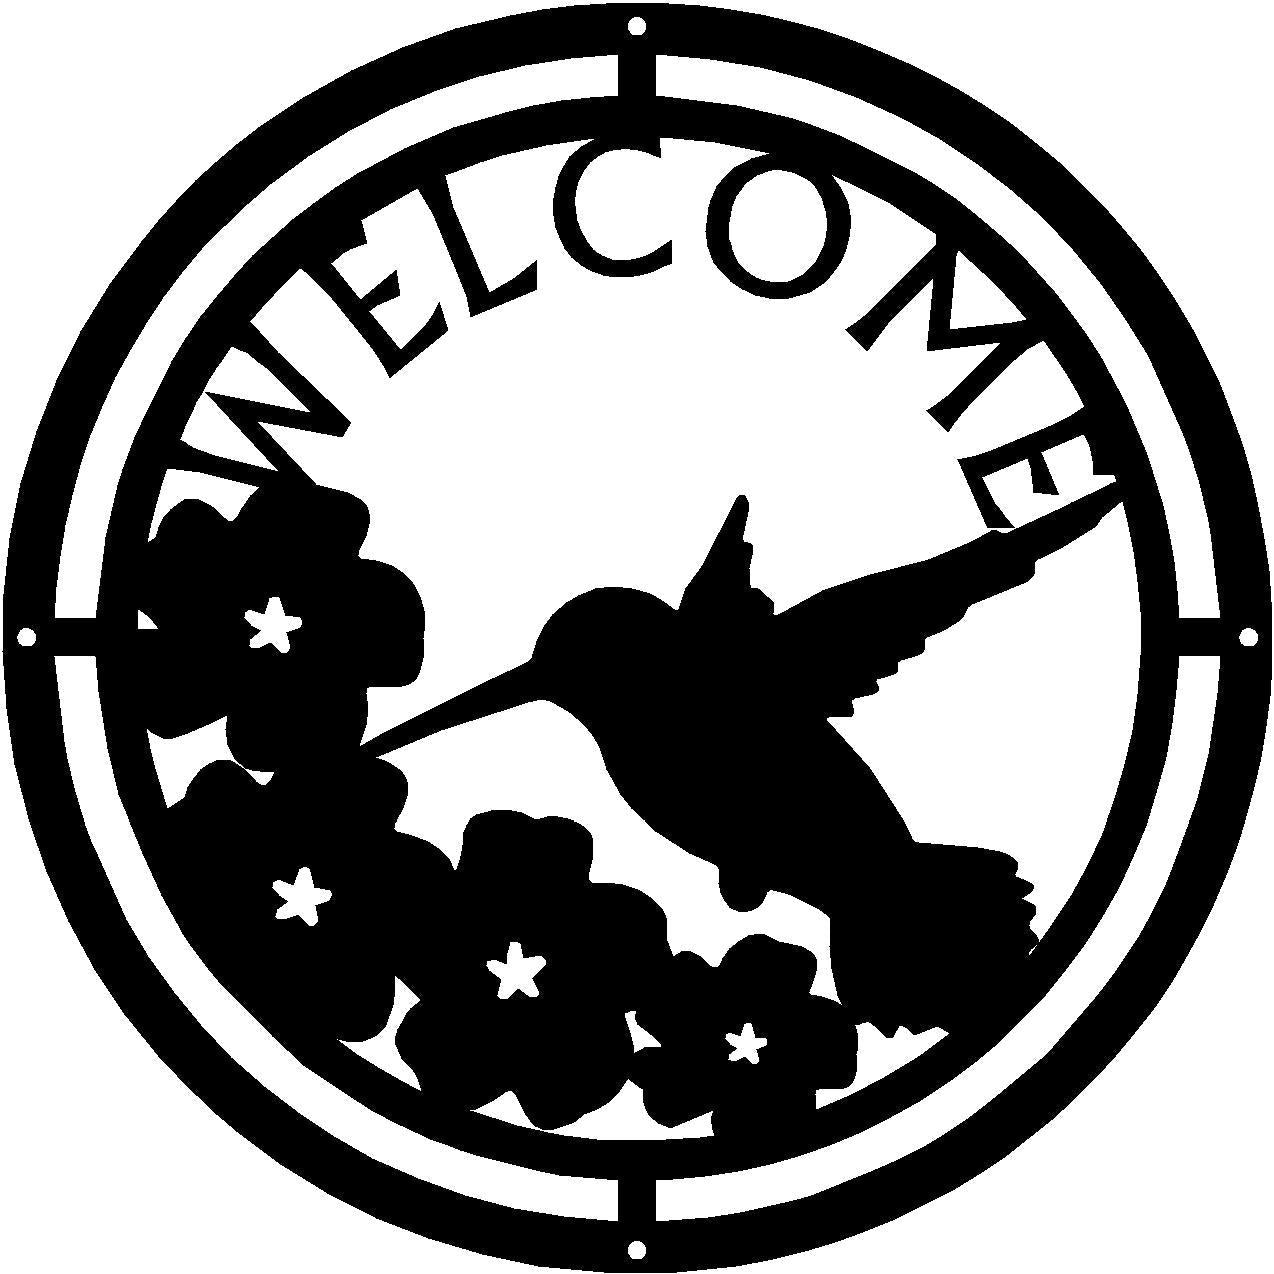 Hummingbird at Morning Glories Round Welcome Sign - The Metal Peddler Welcome Signs bird, flowers, hummingbird, porch, Welcome Sign